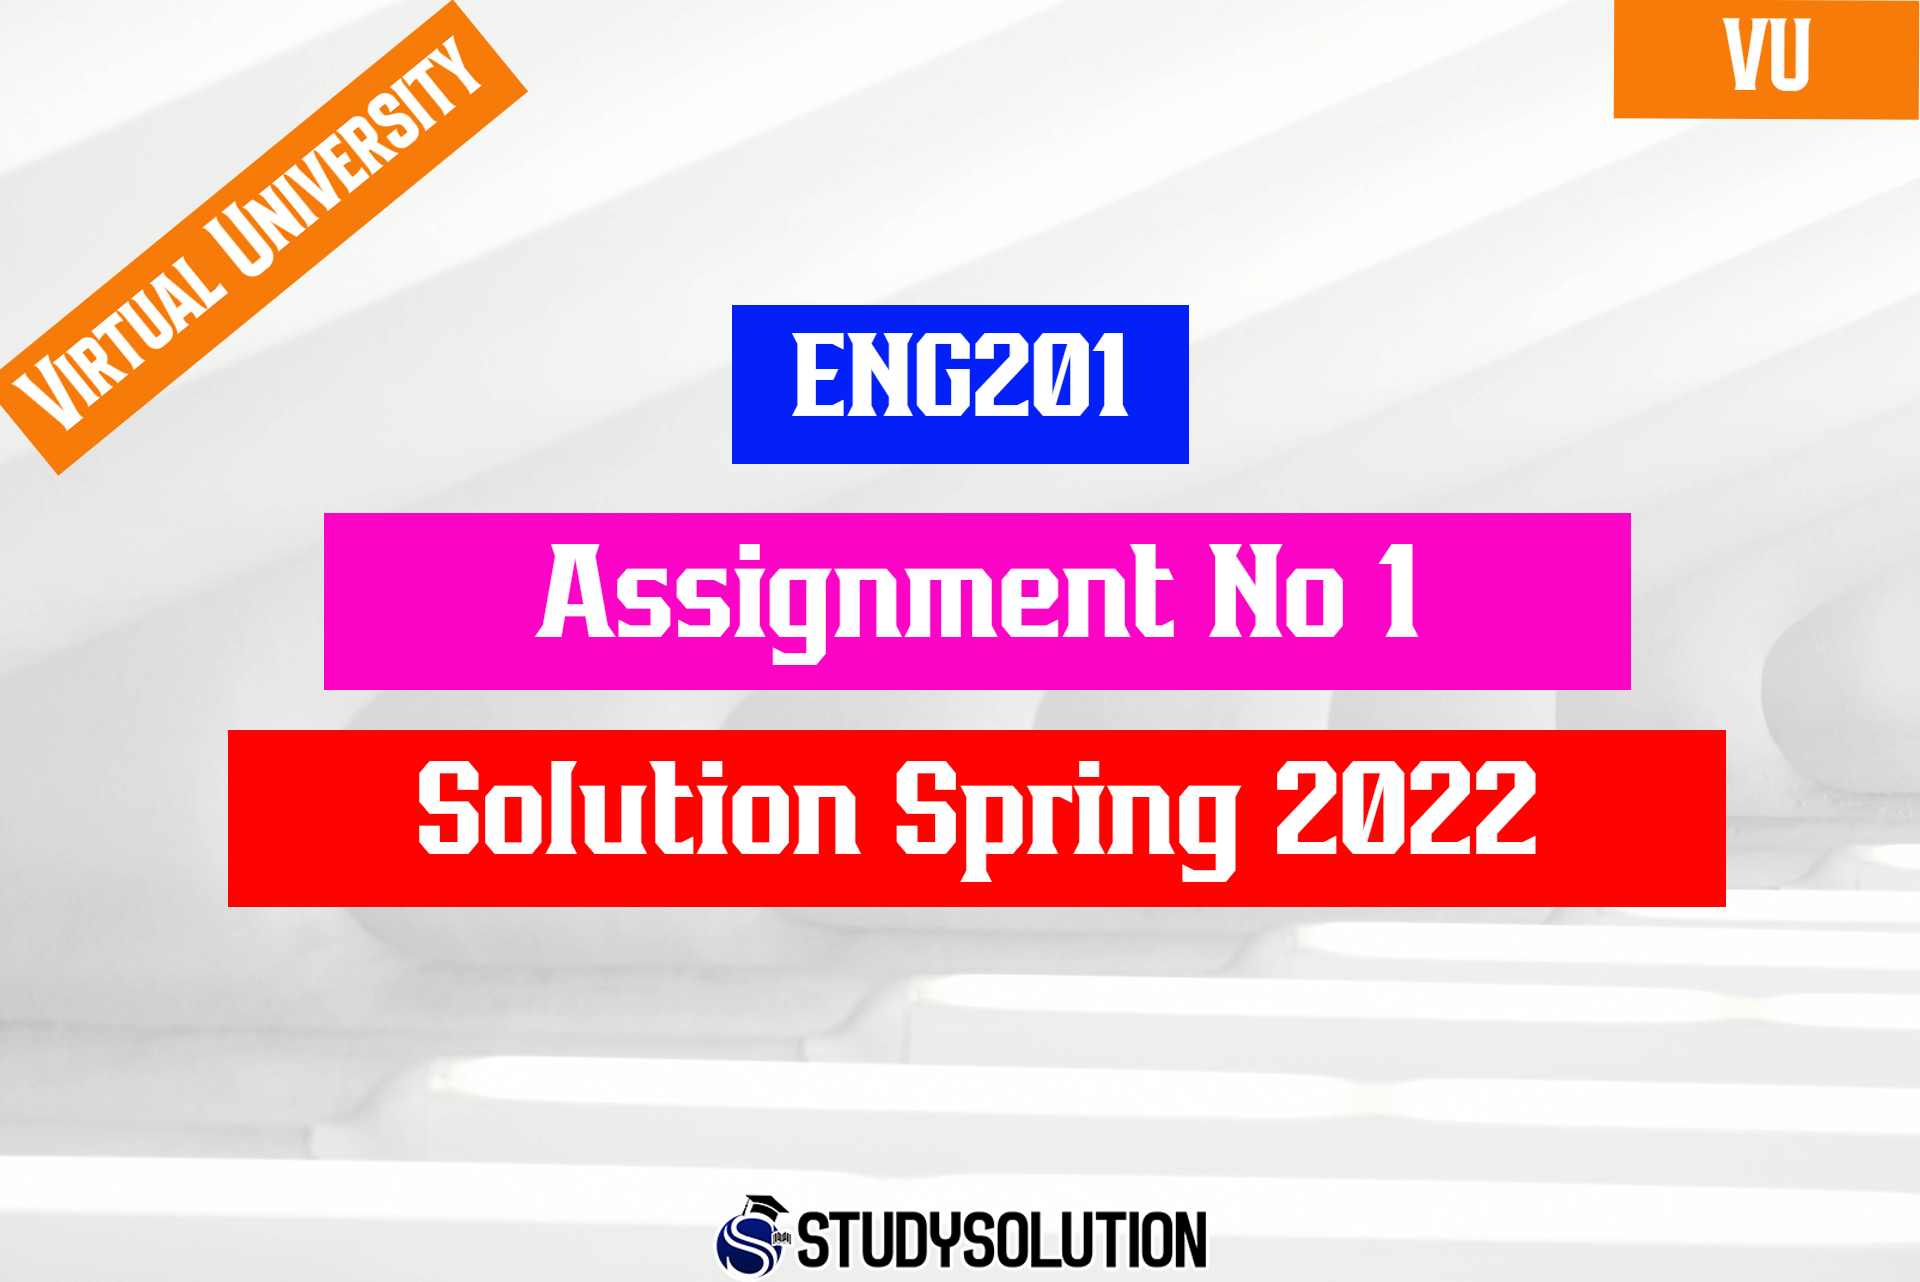 ENG201 Assignment No 1 Solution Spring 2022